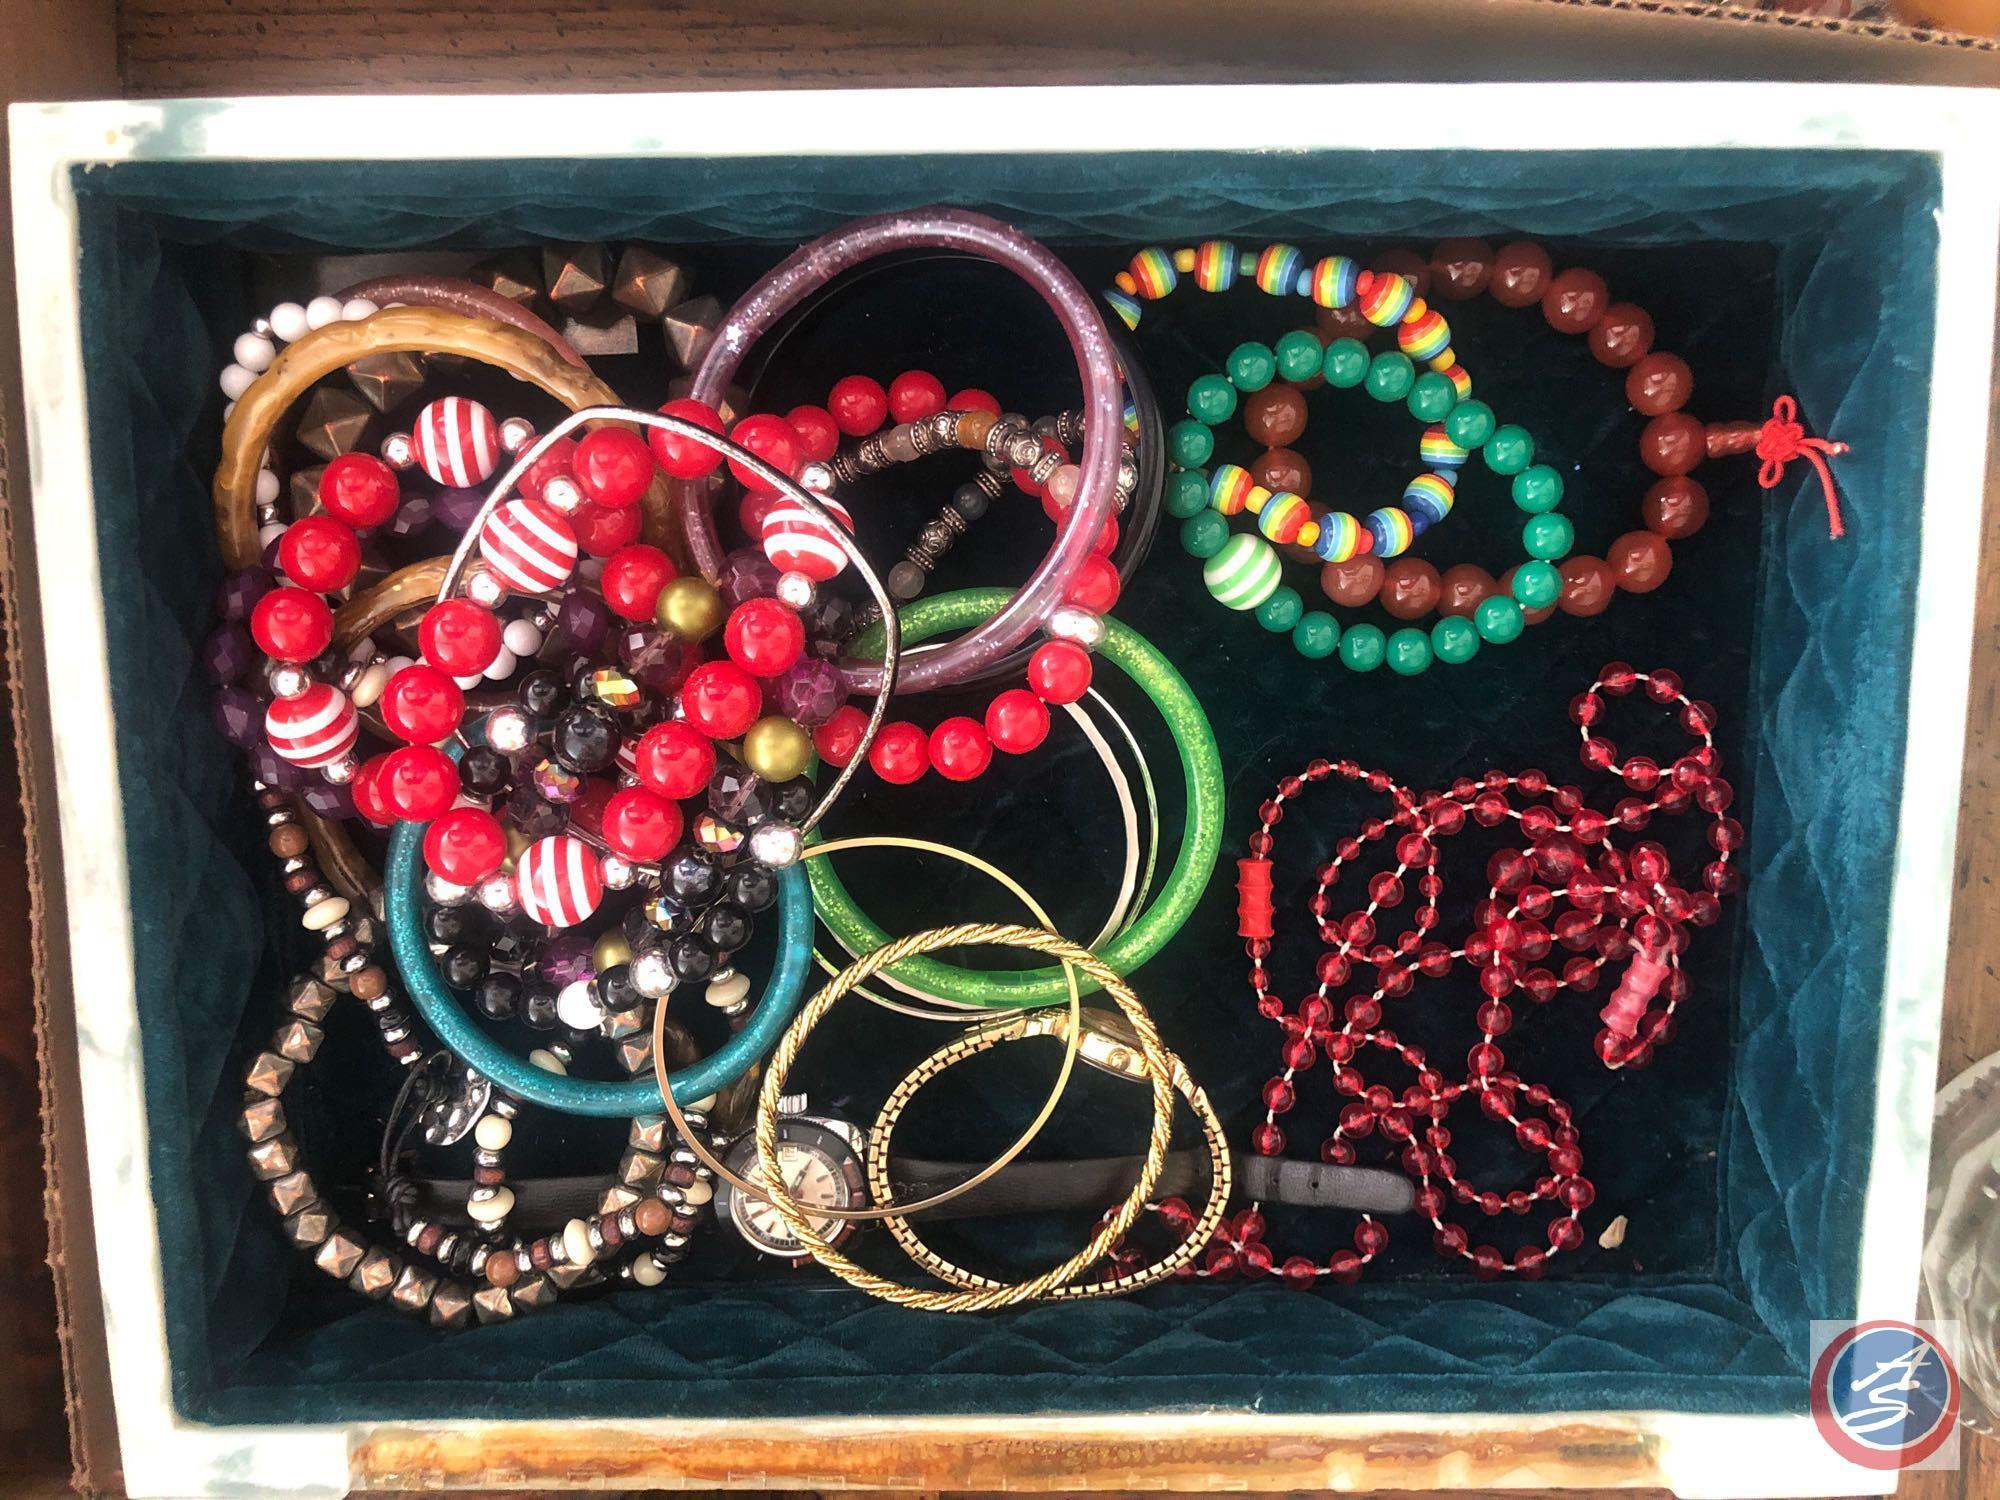 Avondale Genuine Crushed Glass Jewelry Box Containing Assorted Costume Jewelry [[HINGES ARE BROKEN]]